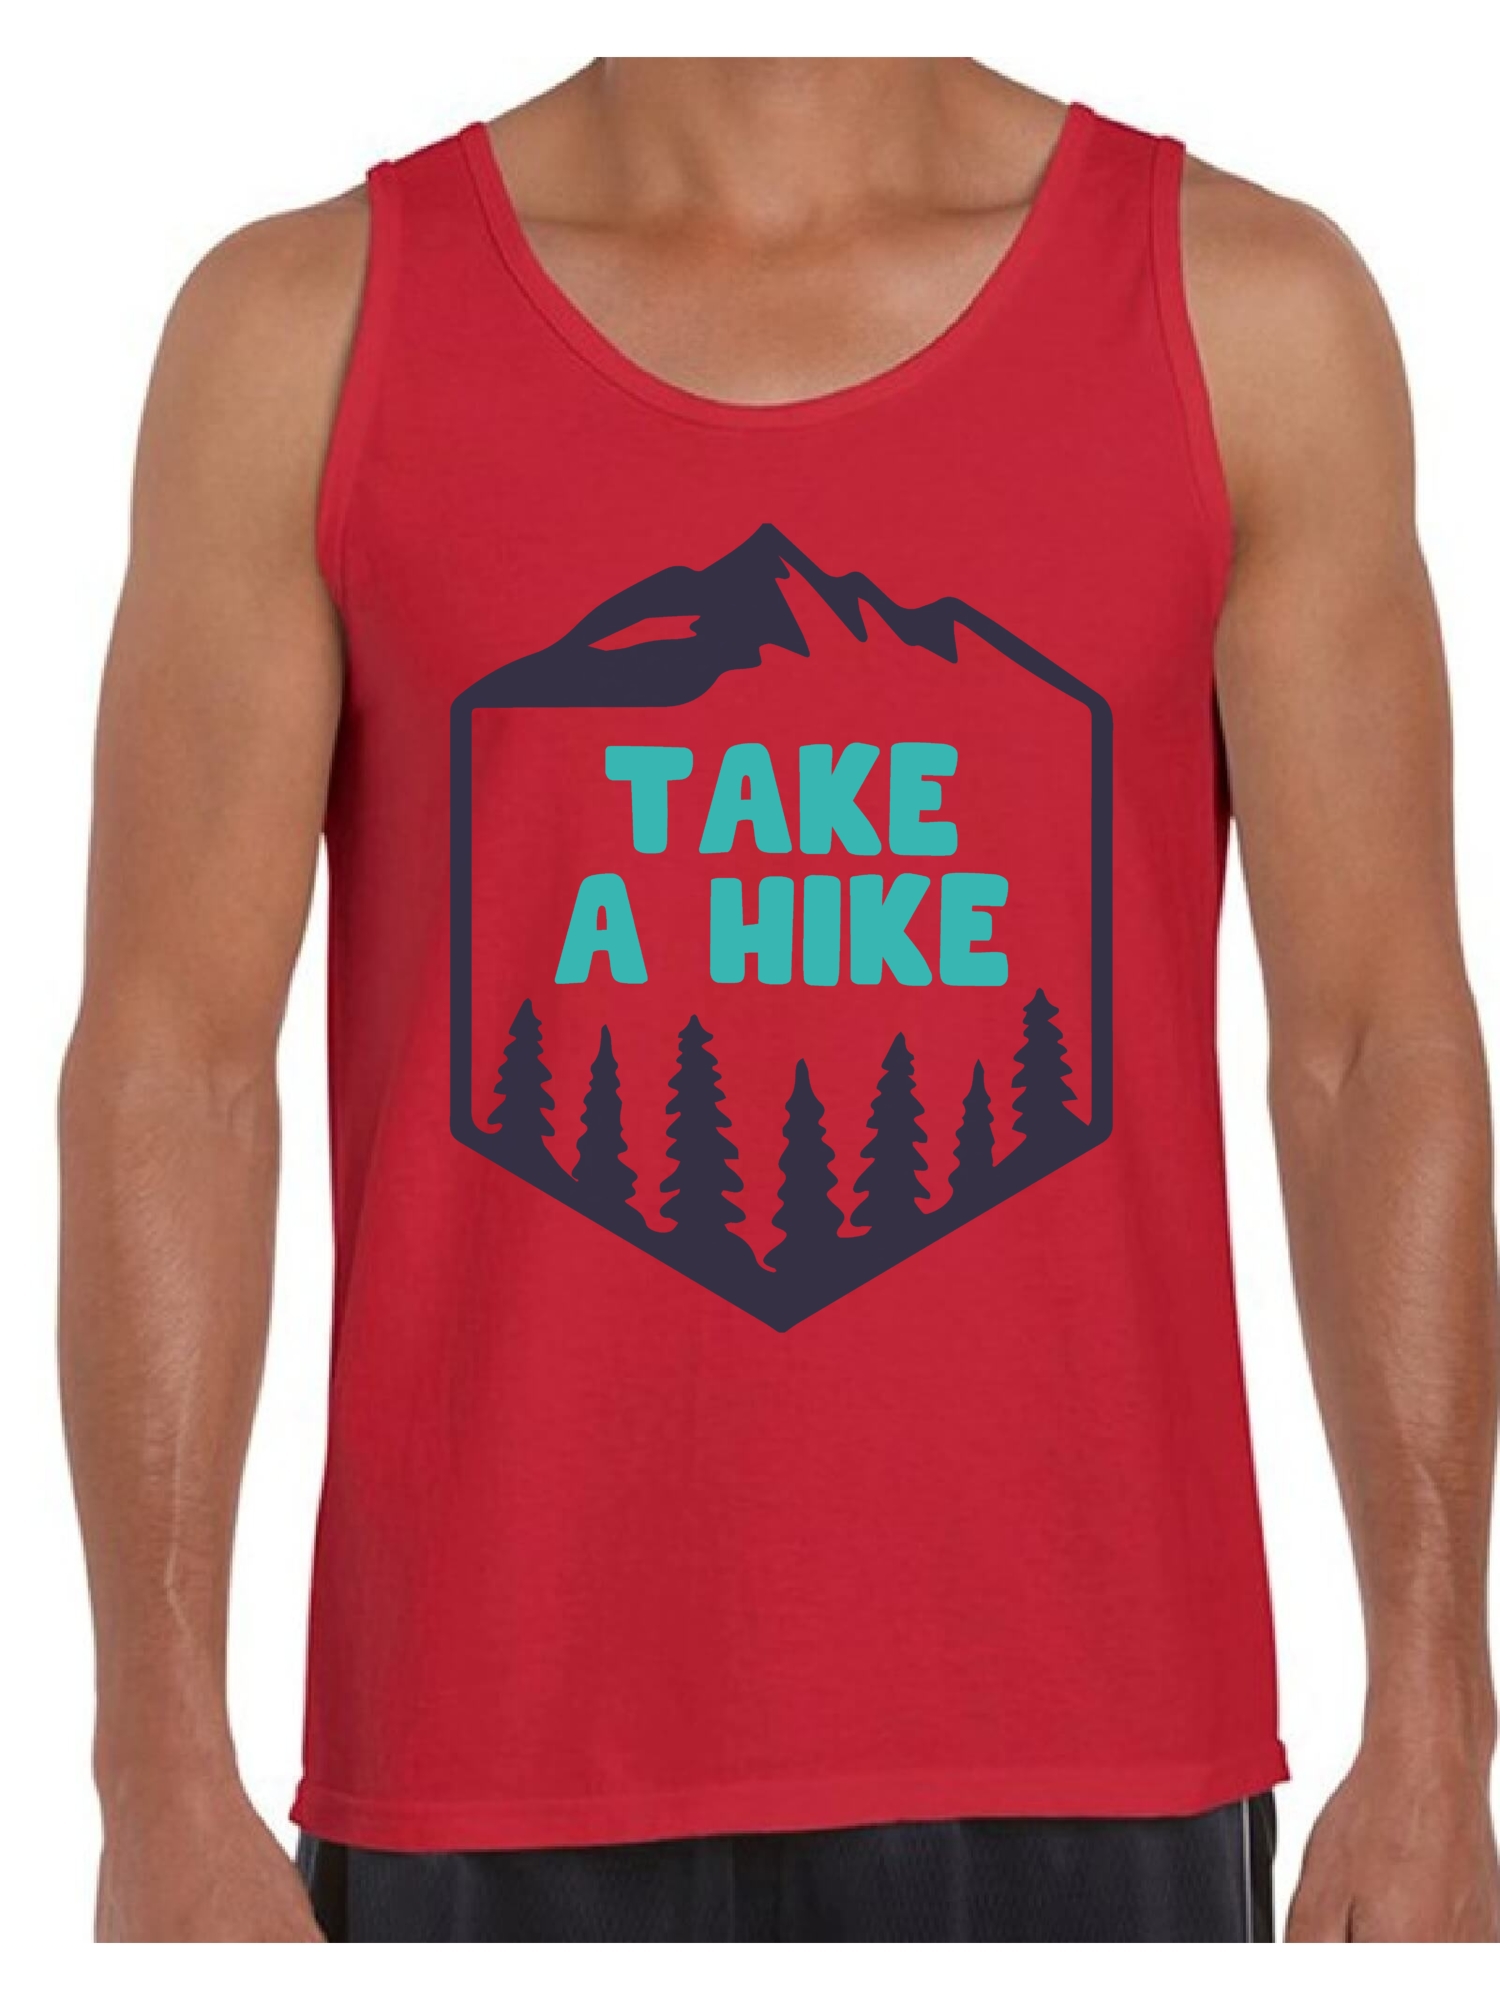 Awkward Styles Hiking Lovers Clothes Take a Hike Tank Top for Men Hike Clothes Sport Outfit Men's Tank Tops Hike Outfit Men Shirts Outdoor Clothing for Men Cute Hiking T Shirt for Boyfriend - image 1 of 4